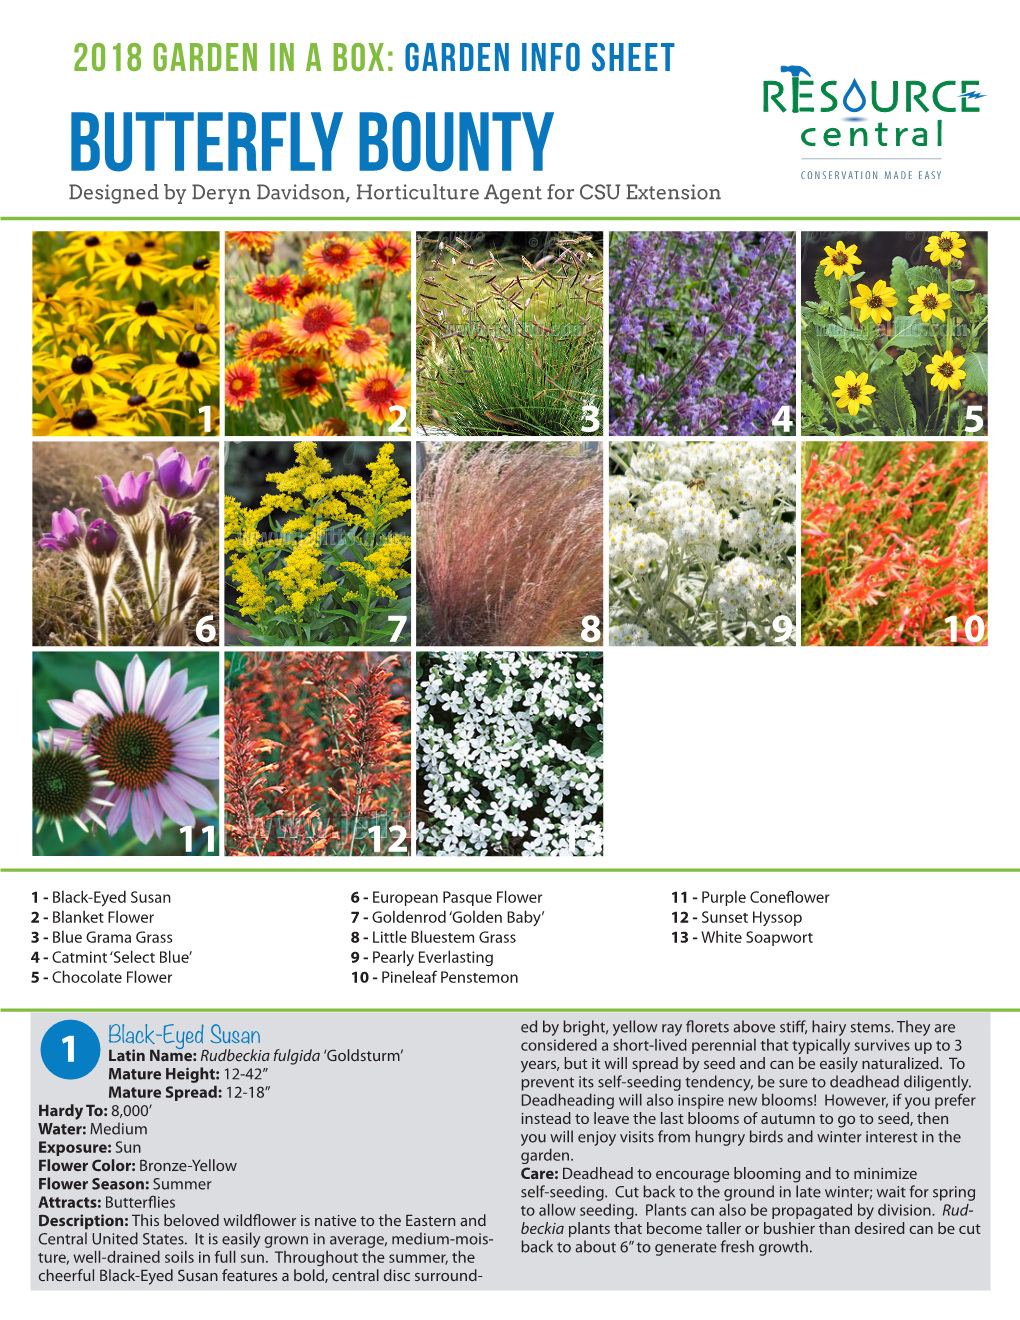 Butterfly Bounty Designed by Deryn Davidson, Horticulture Agent for CSU Extension